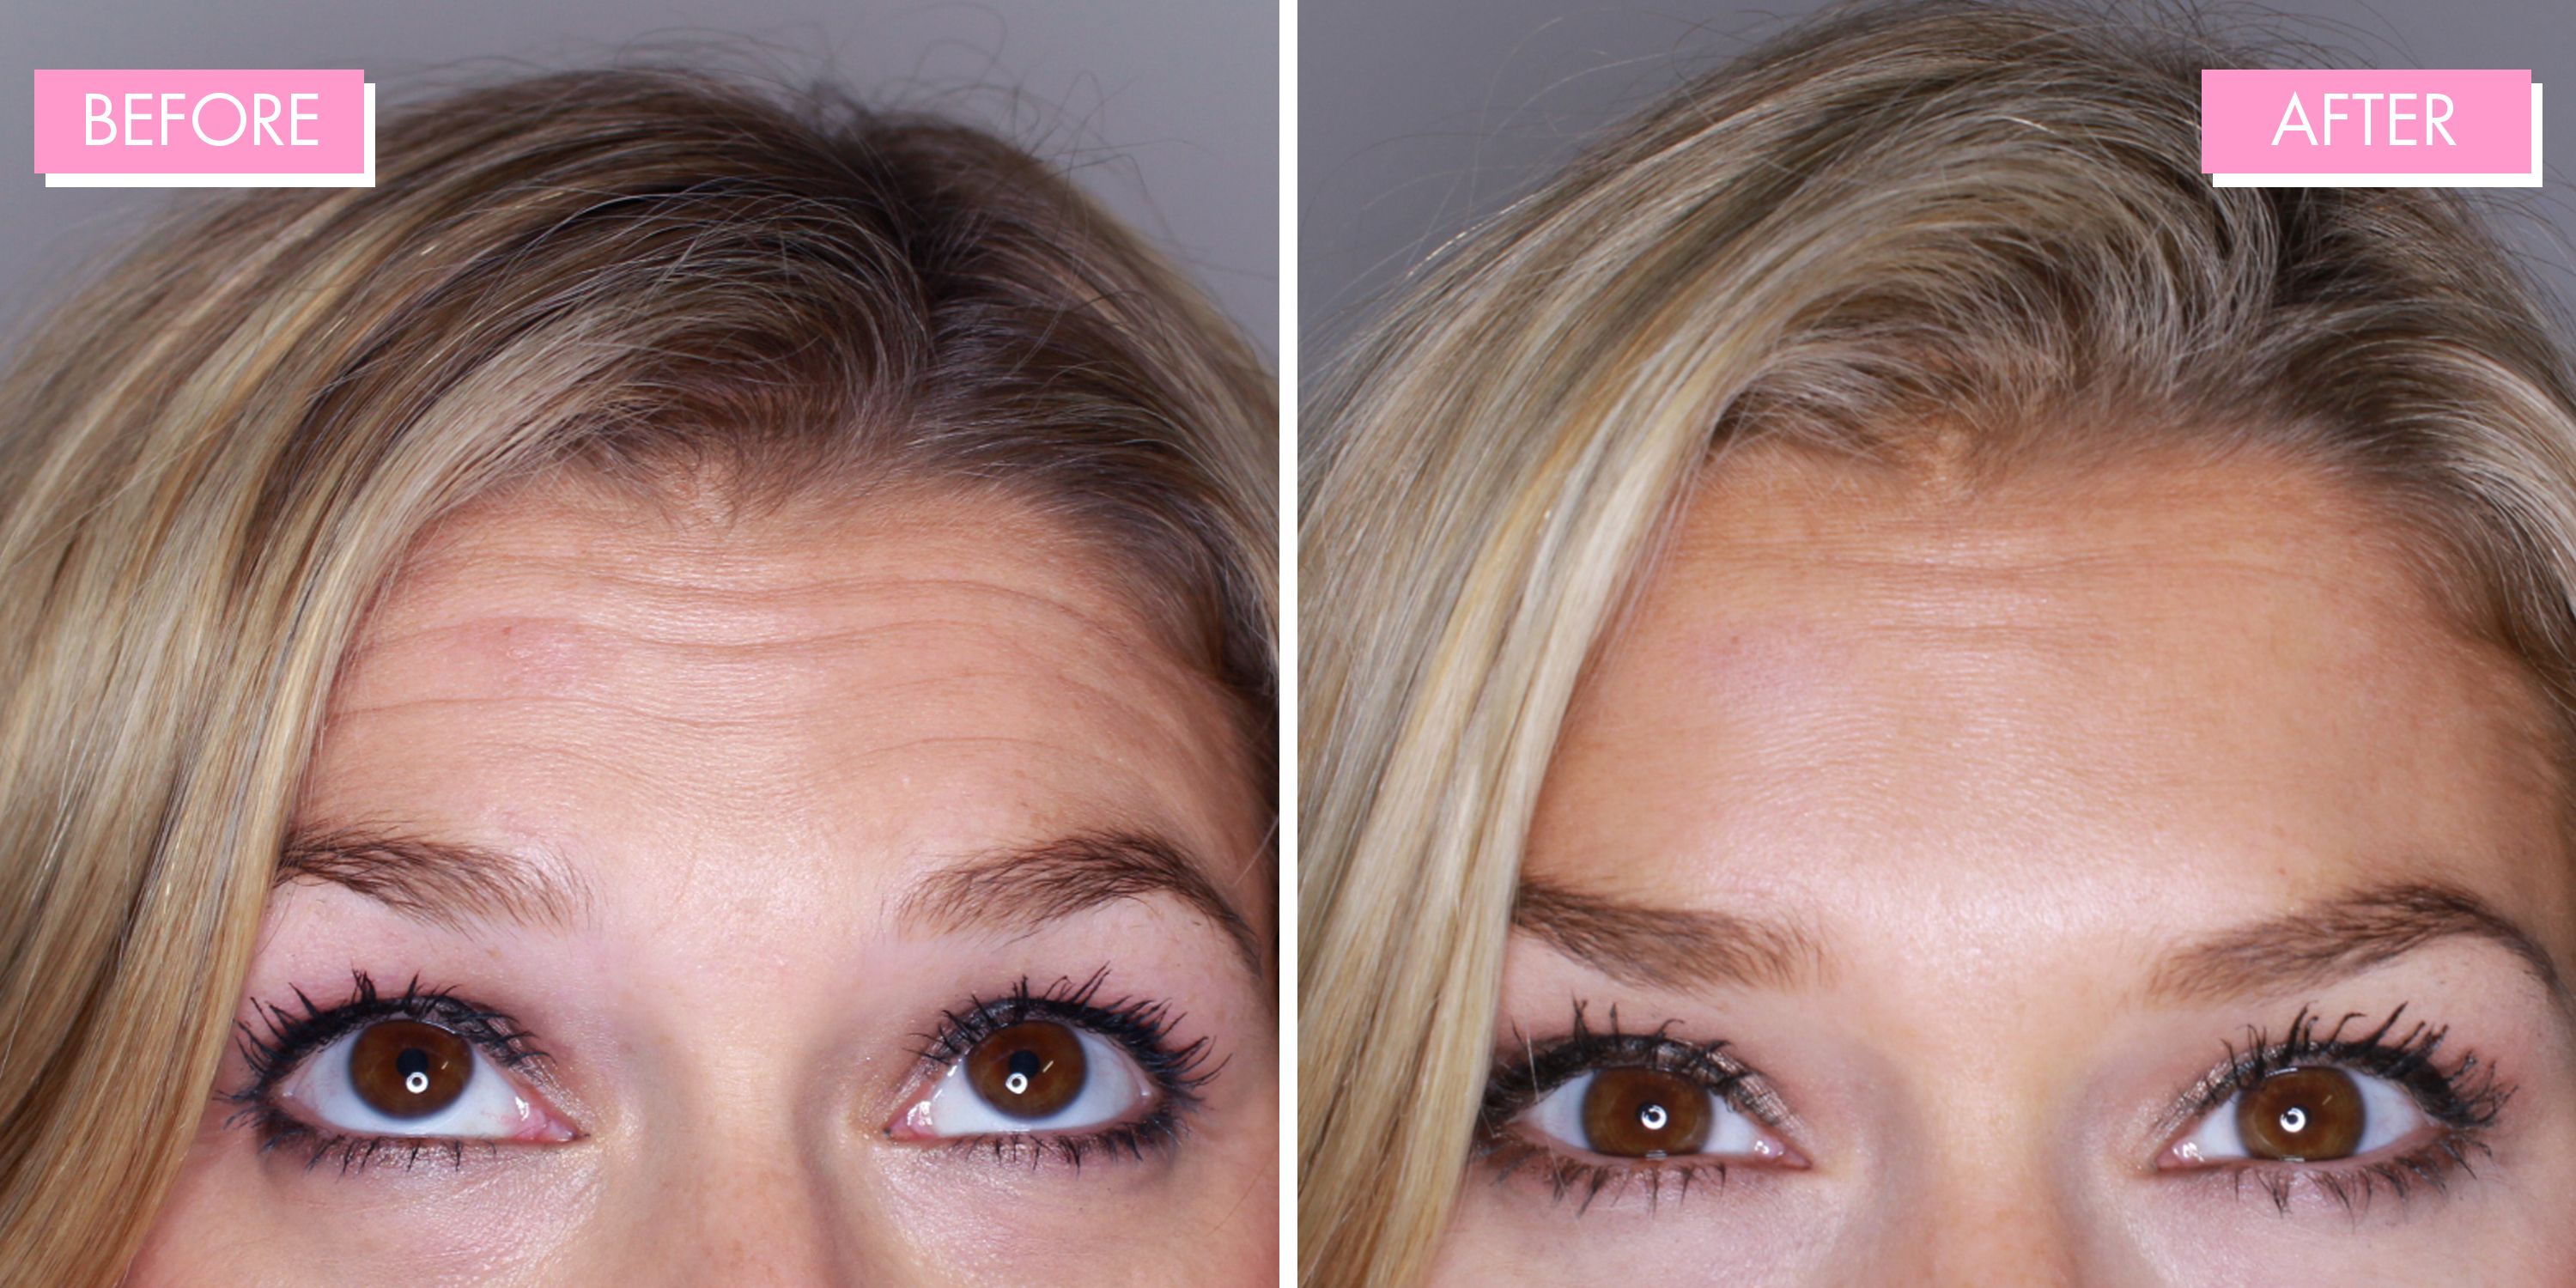 Botox Before and After: Transformations that Speak Volumes - BeautyKylie